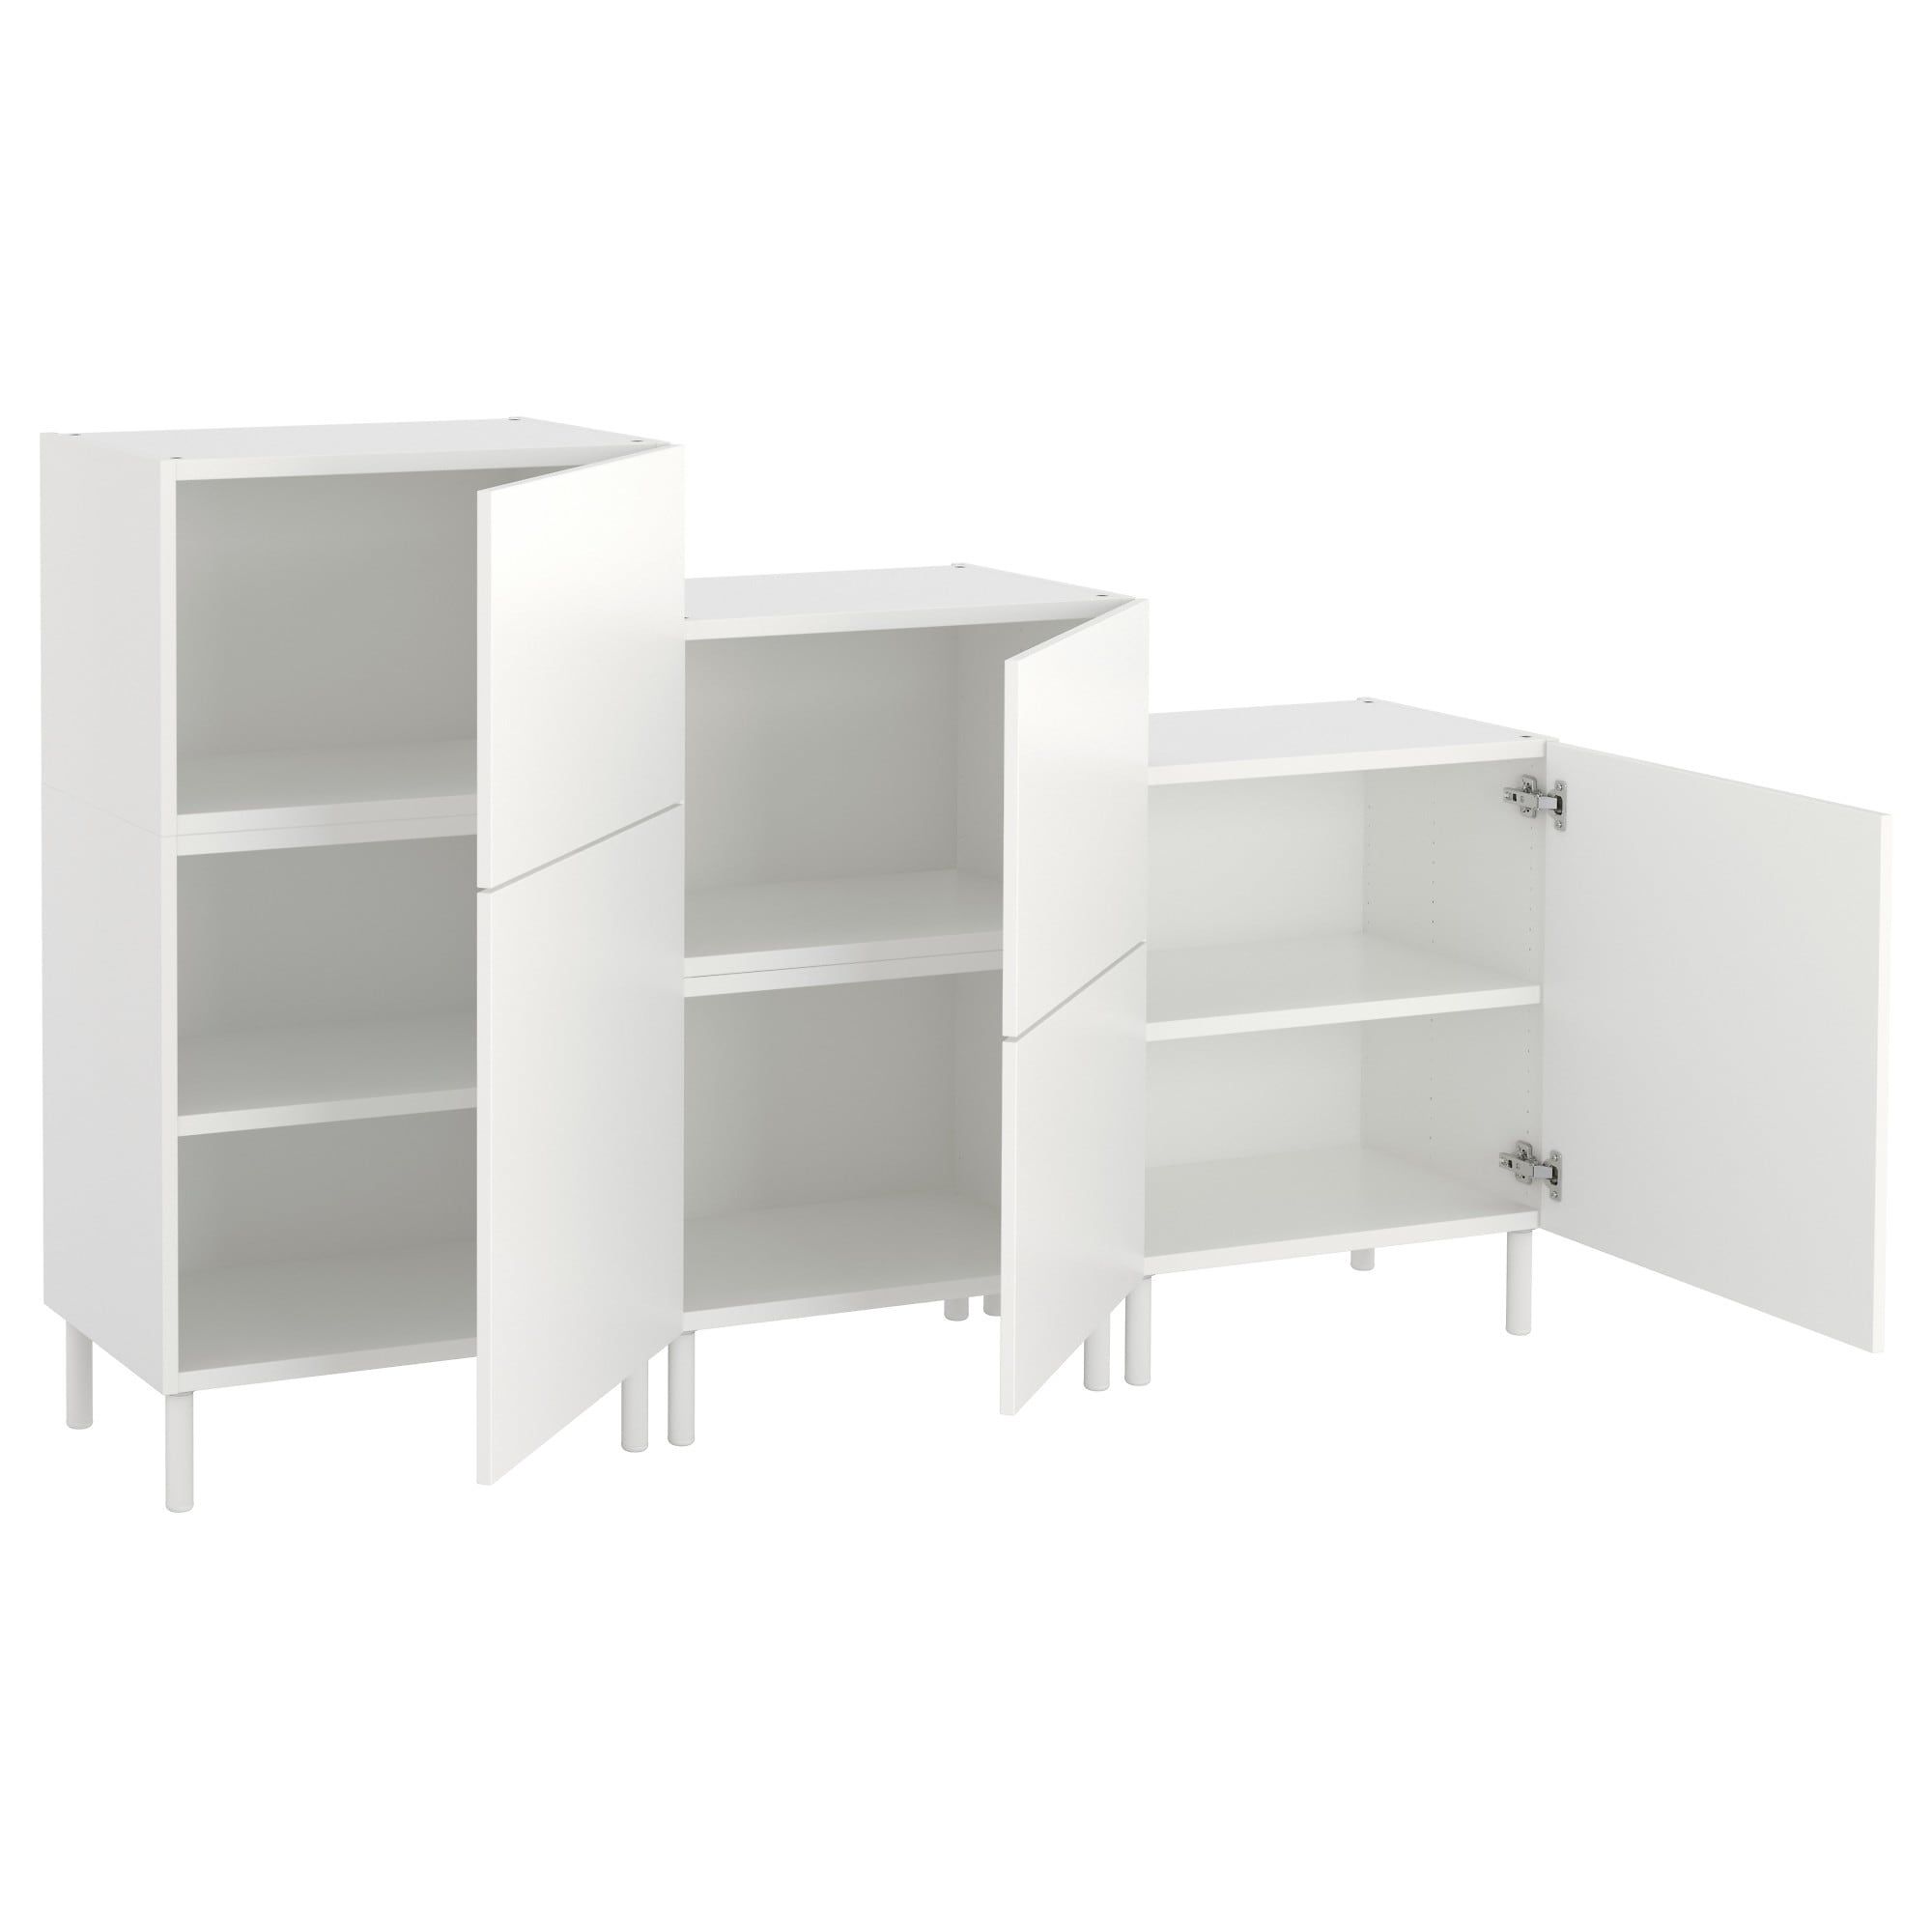 2019 Platsa Cabinet – Ikea For White Wash 4 Door Galvanized Sideboards (View 14 of 20)